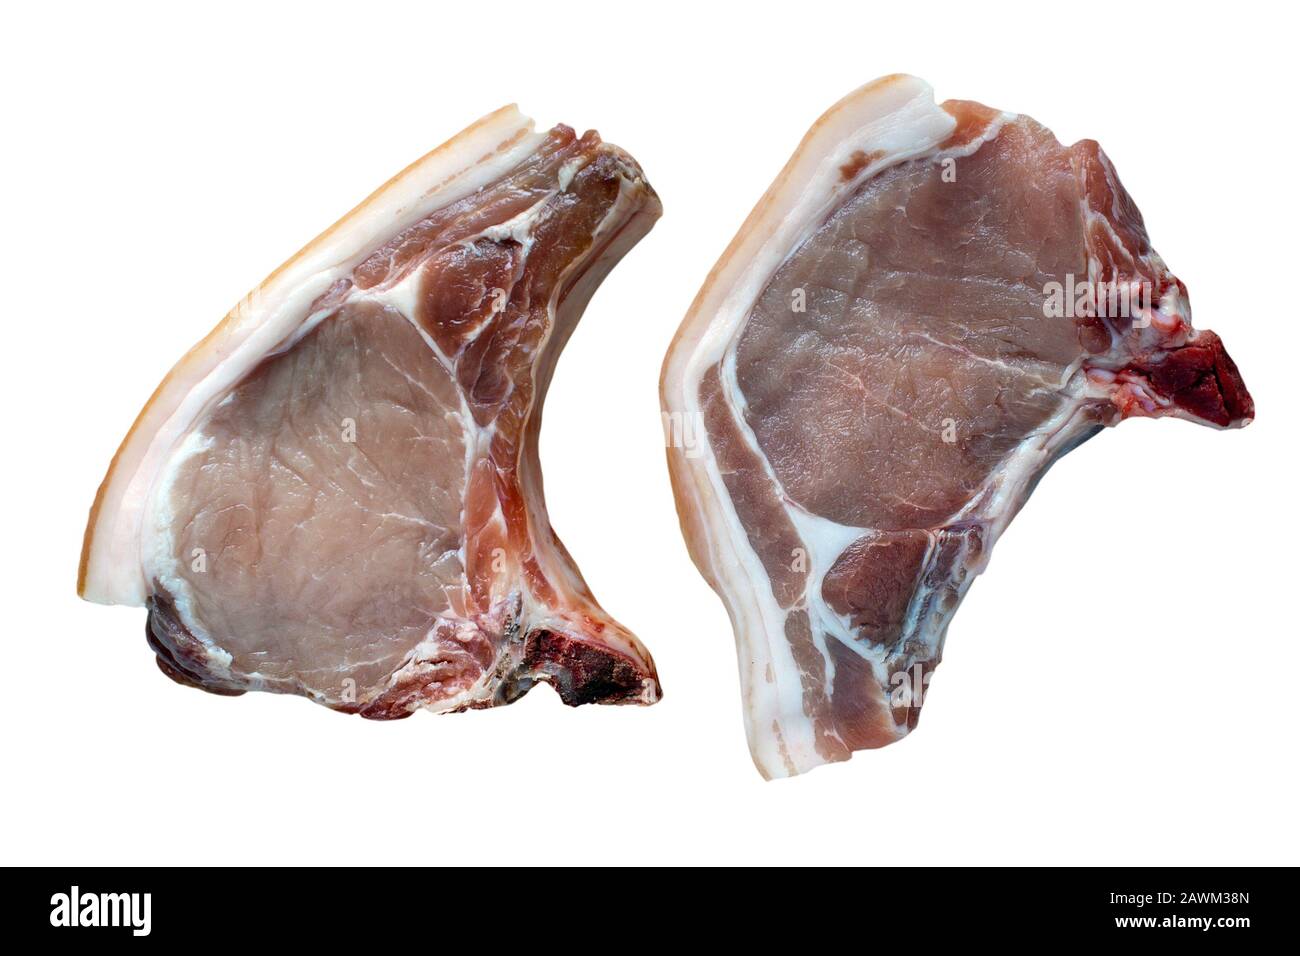 Two raw pork loin chop steaks as would be served at a typical butchers on an isolated white background with a clipping path Stock Photo